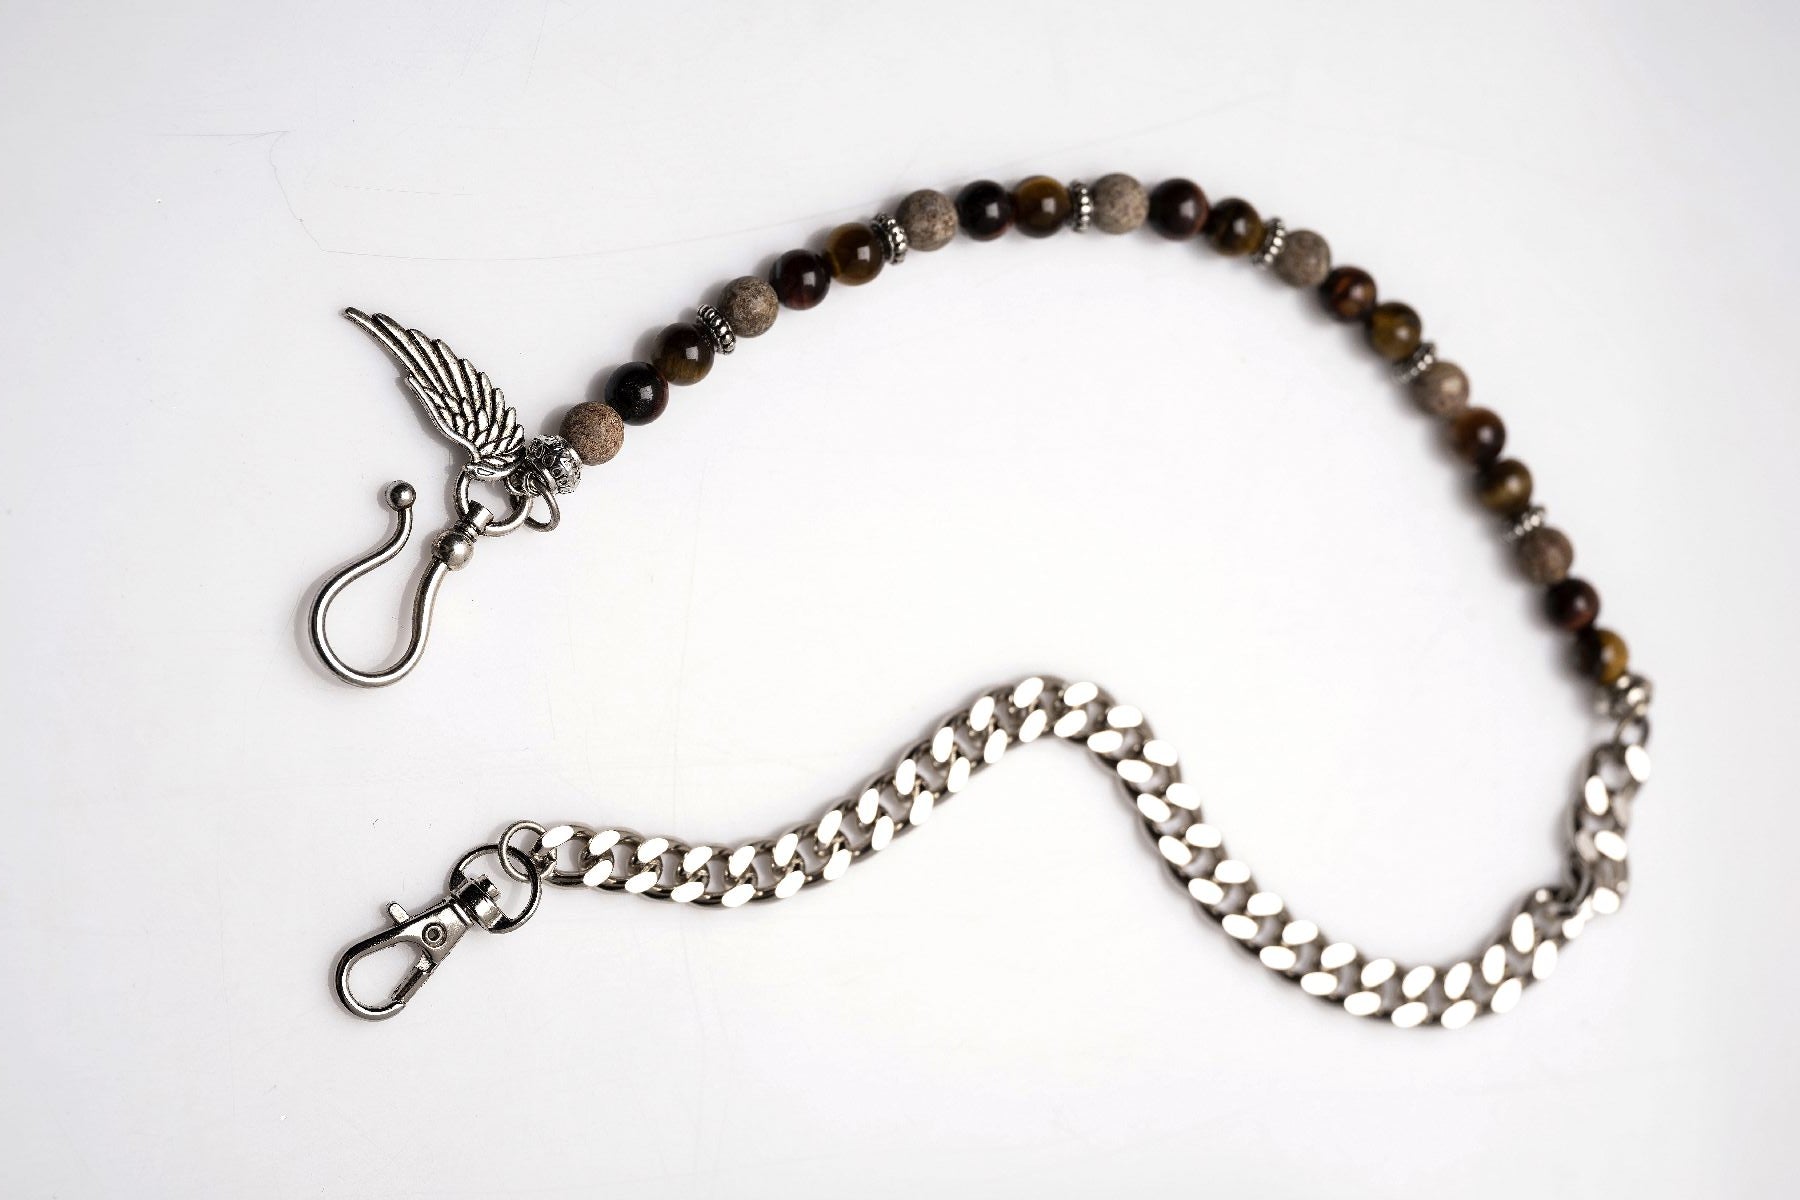 Chain for vest and trousers